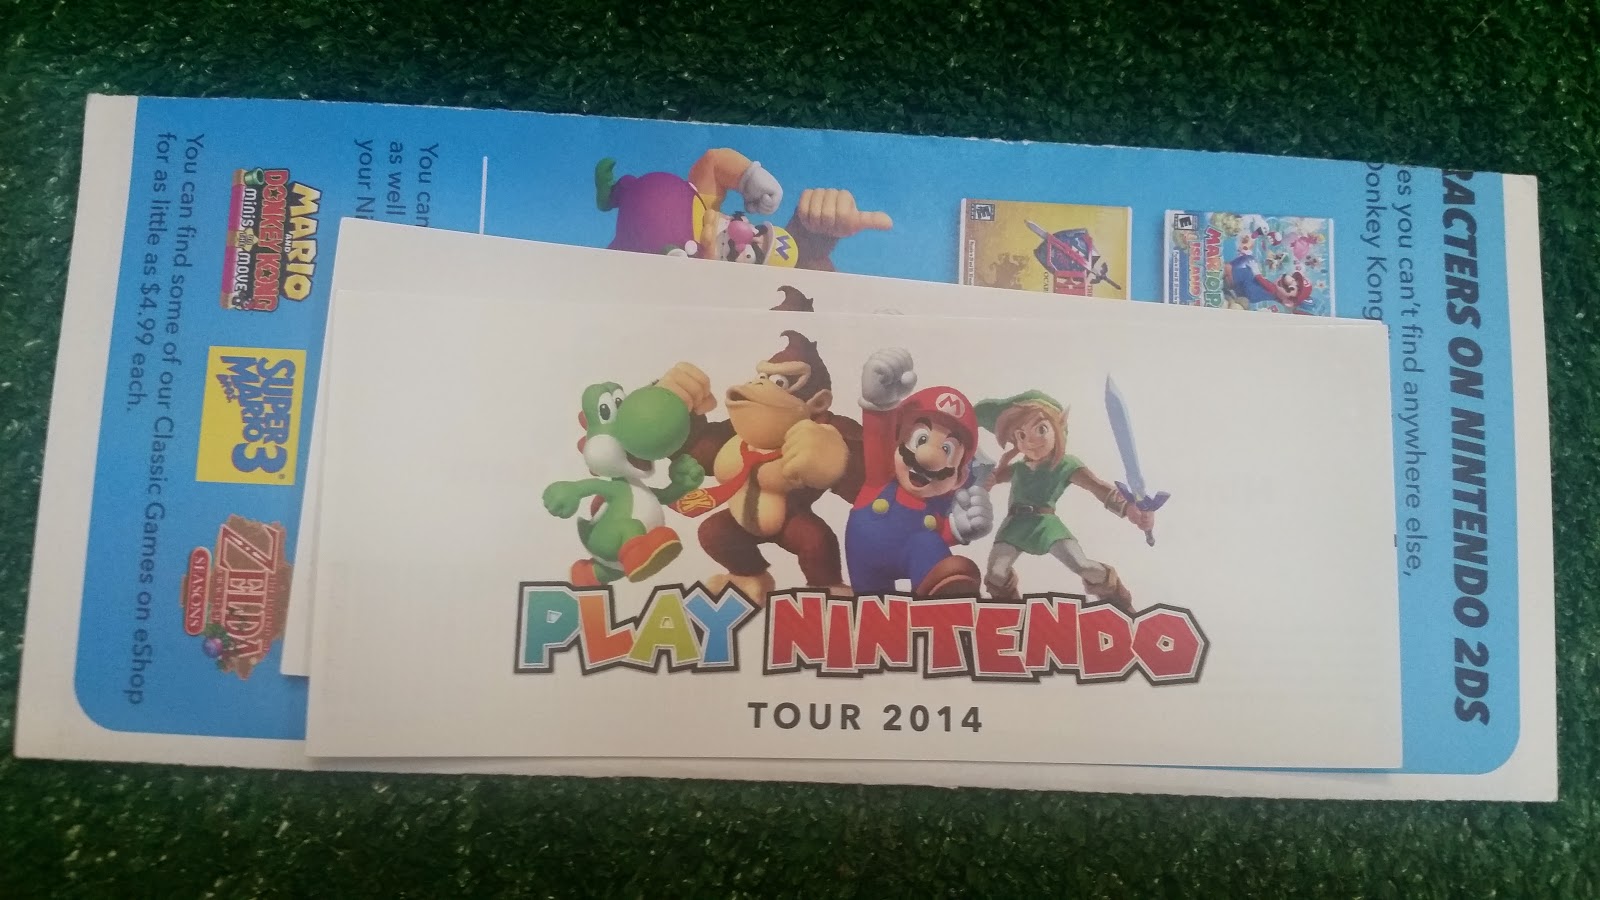 Famous Footwear and Play Nintendo Tour Weekend Recap #FamousFootwear #PlayNintendoTour via www.Productreviewmom.com